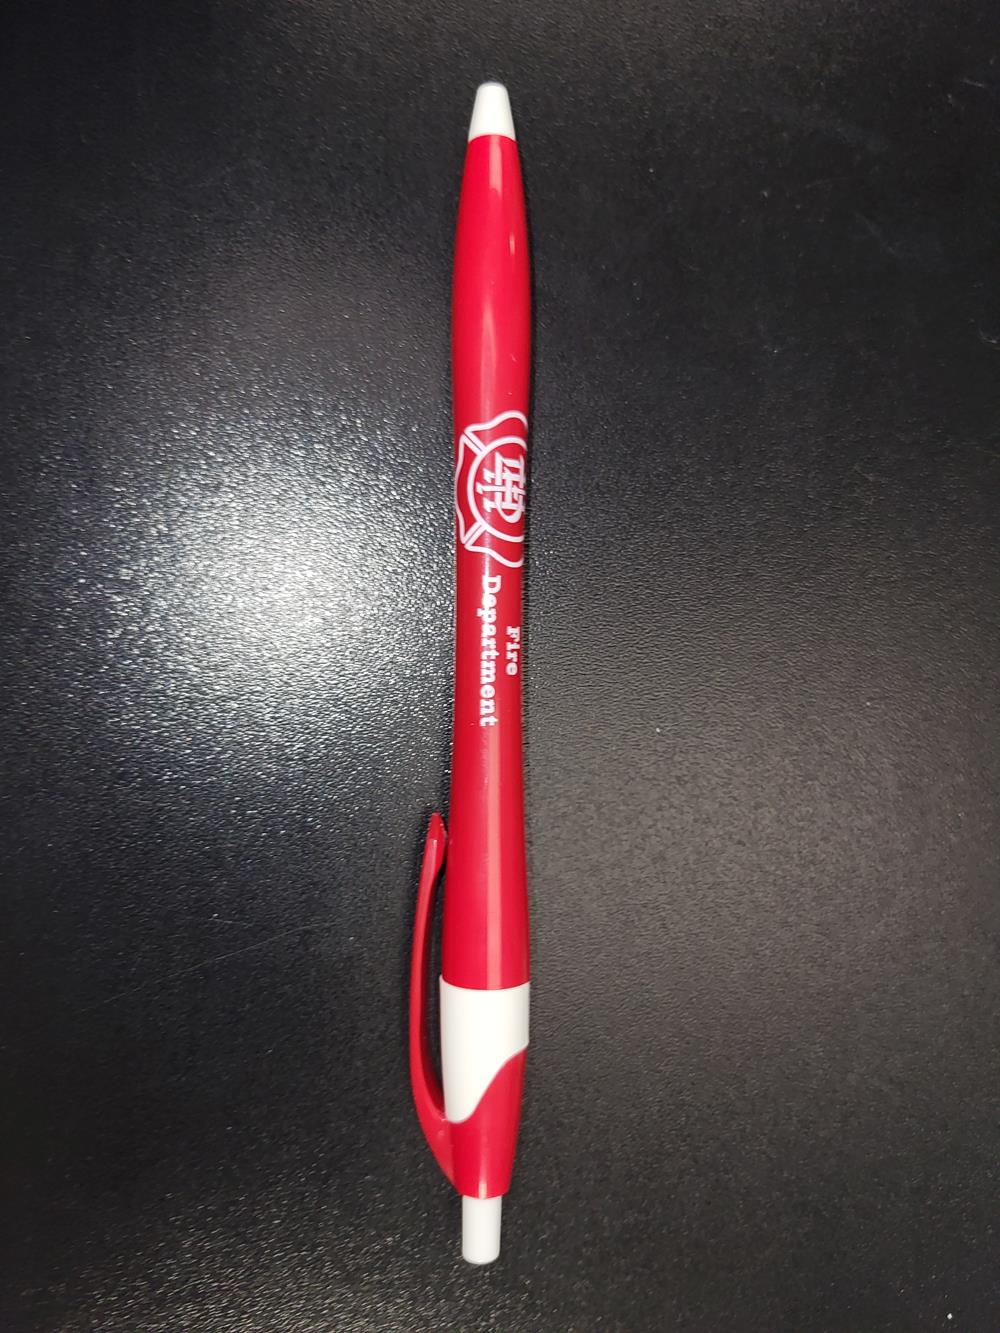 a red pen on a black surface